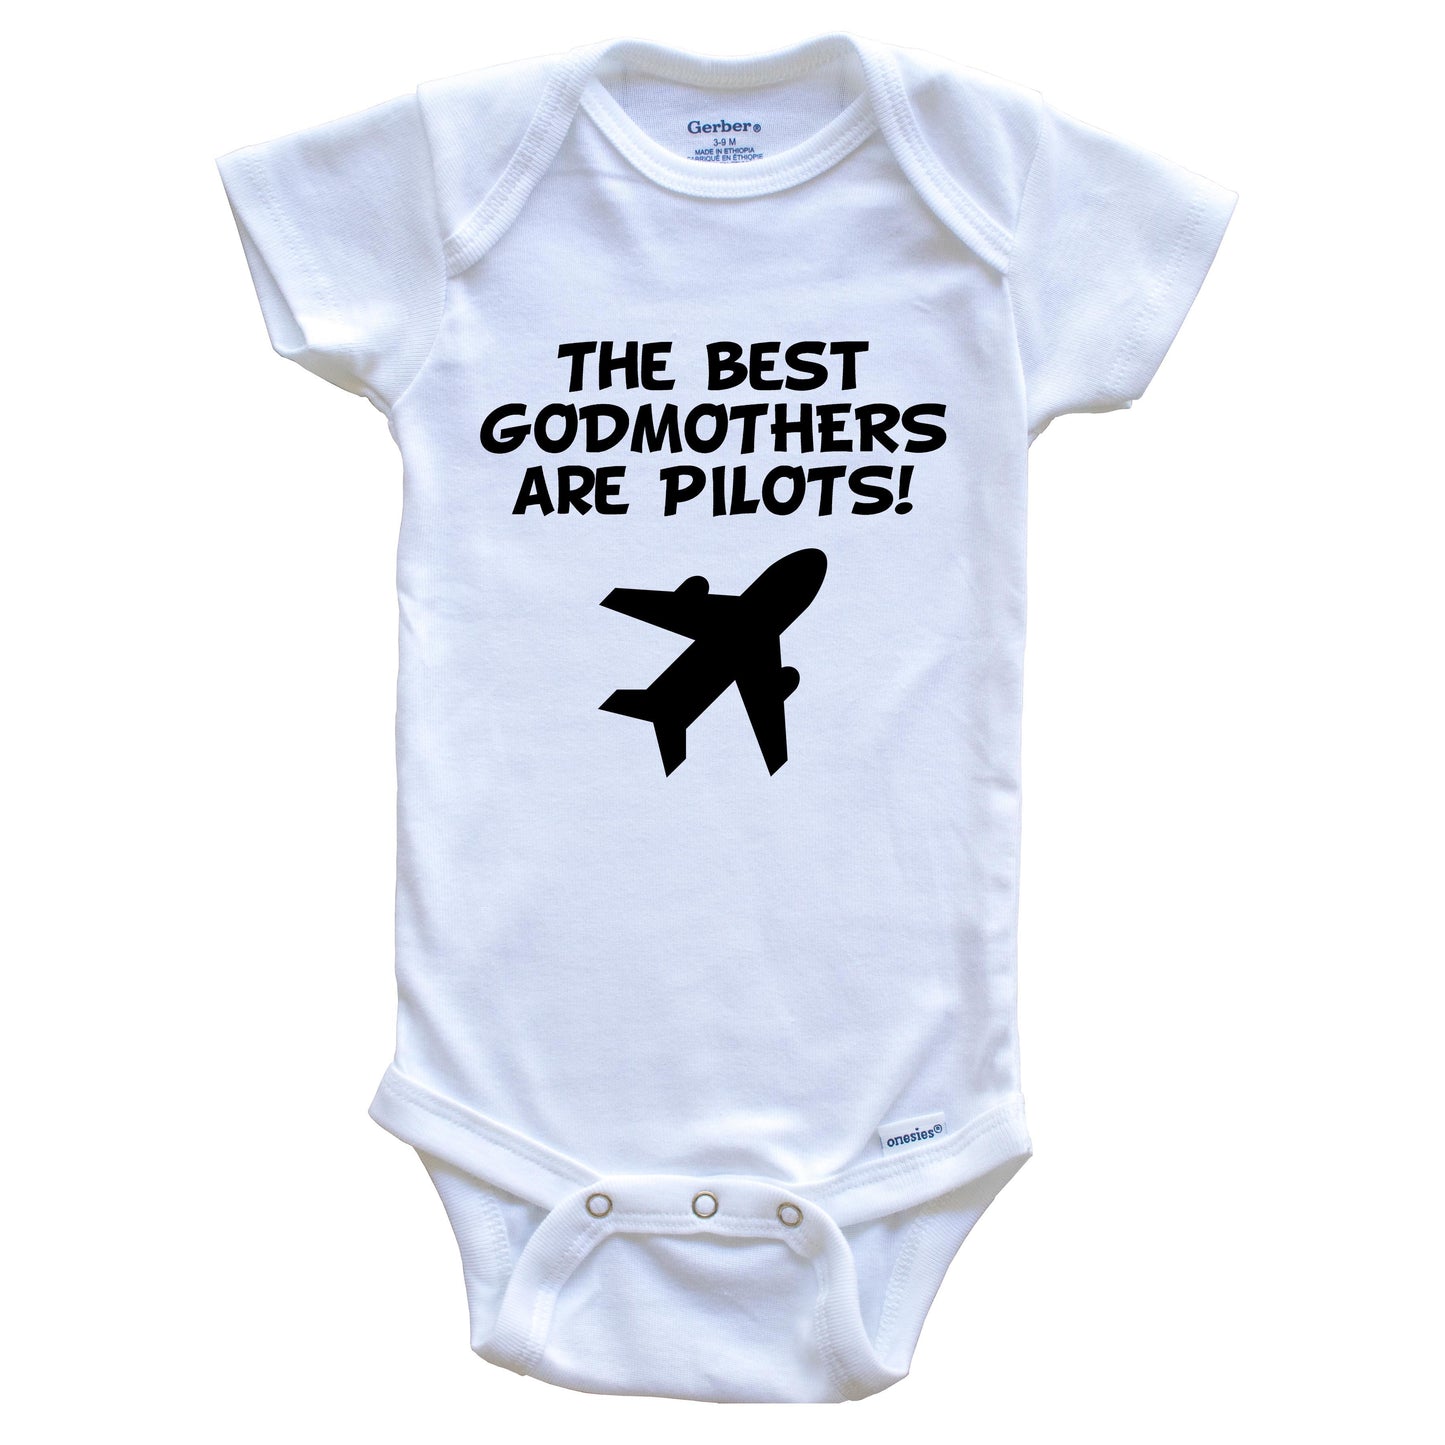 The Best Godmothers Are Pilots Funny Godchild Baby Onesie